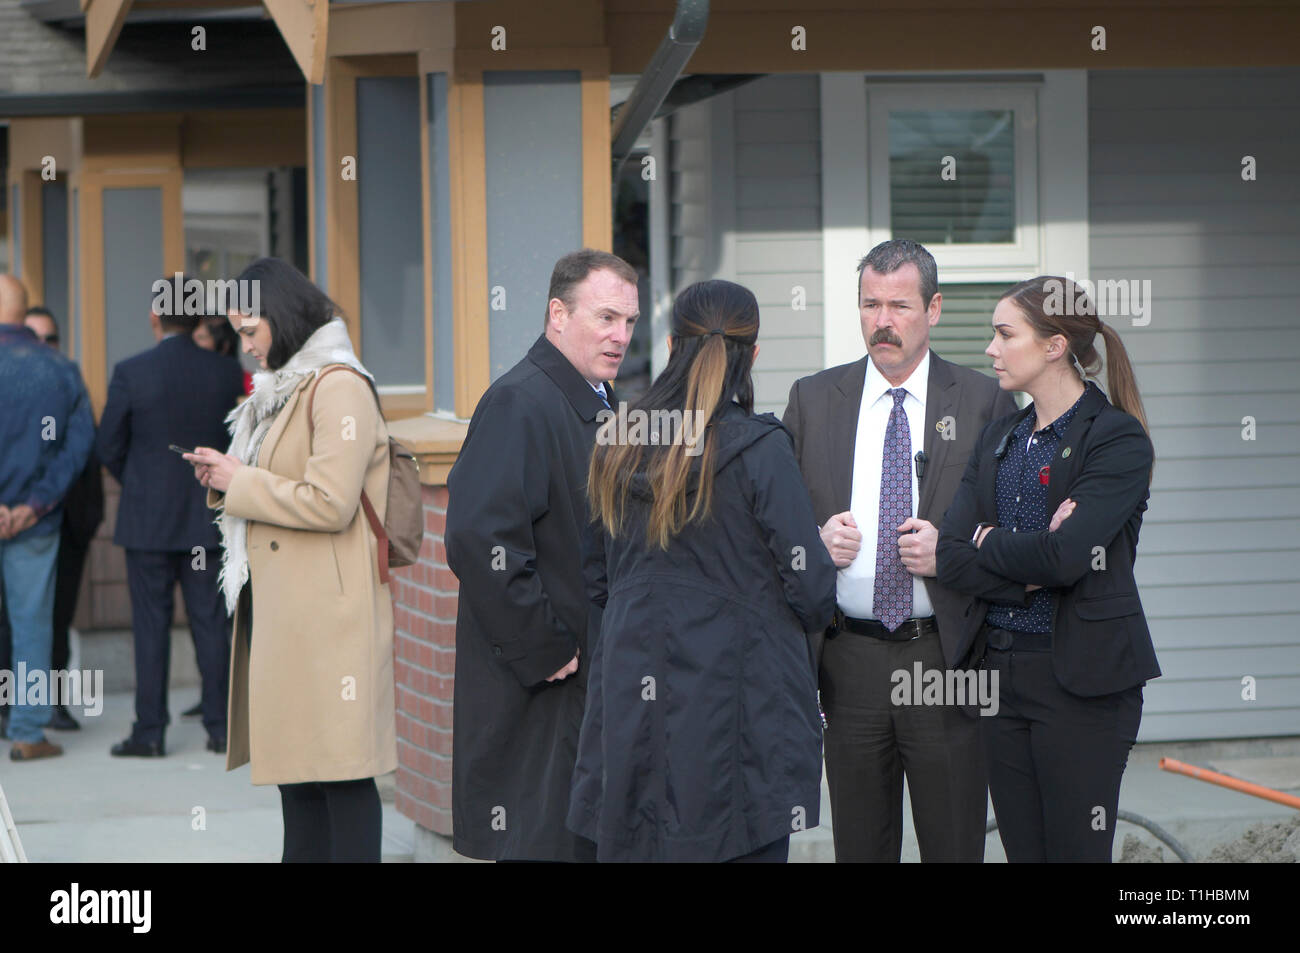 Maple Ridge, B. C. March 25, 2019.Canadian Prime Minster Justin Trudeau in Maple Ridge to address the media on affordable housing. Security staff. Stock Photo